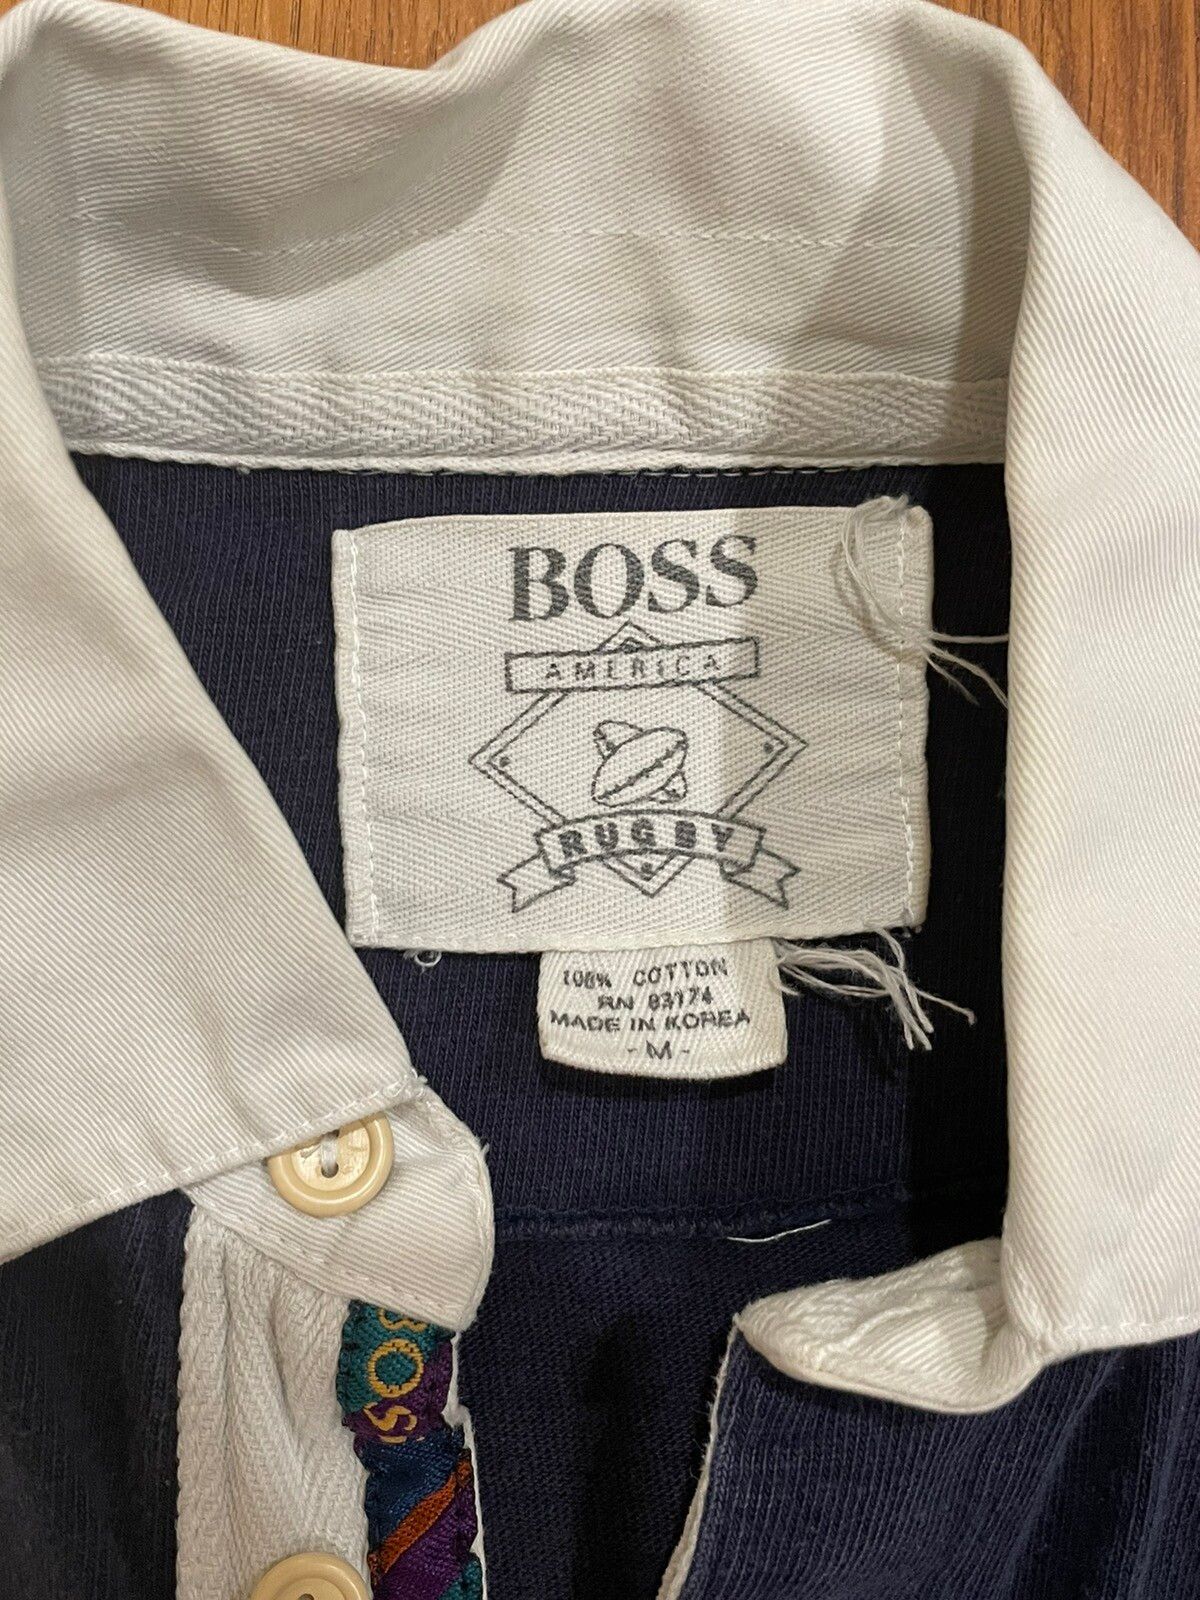 Hugo Boss 90s Boss America striped rugby Polo shirt Size US M / EU 48-50 / 2 - 2 Preview